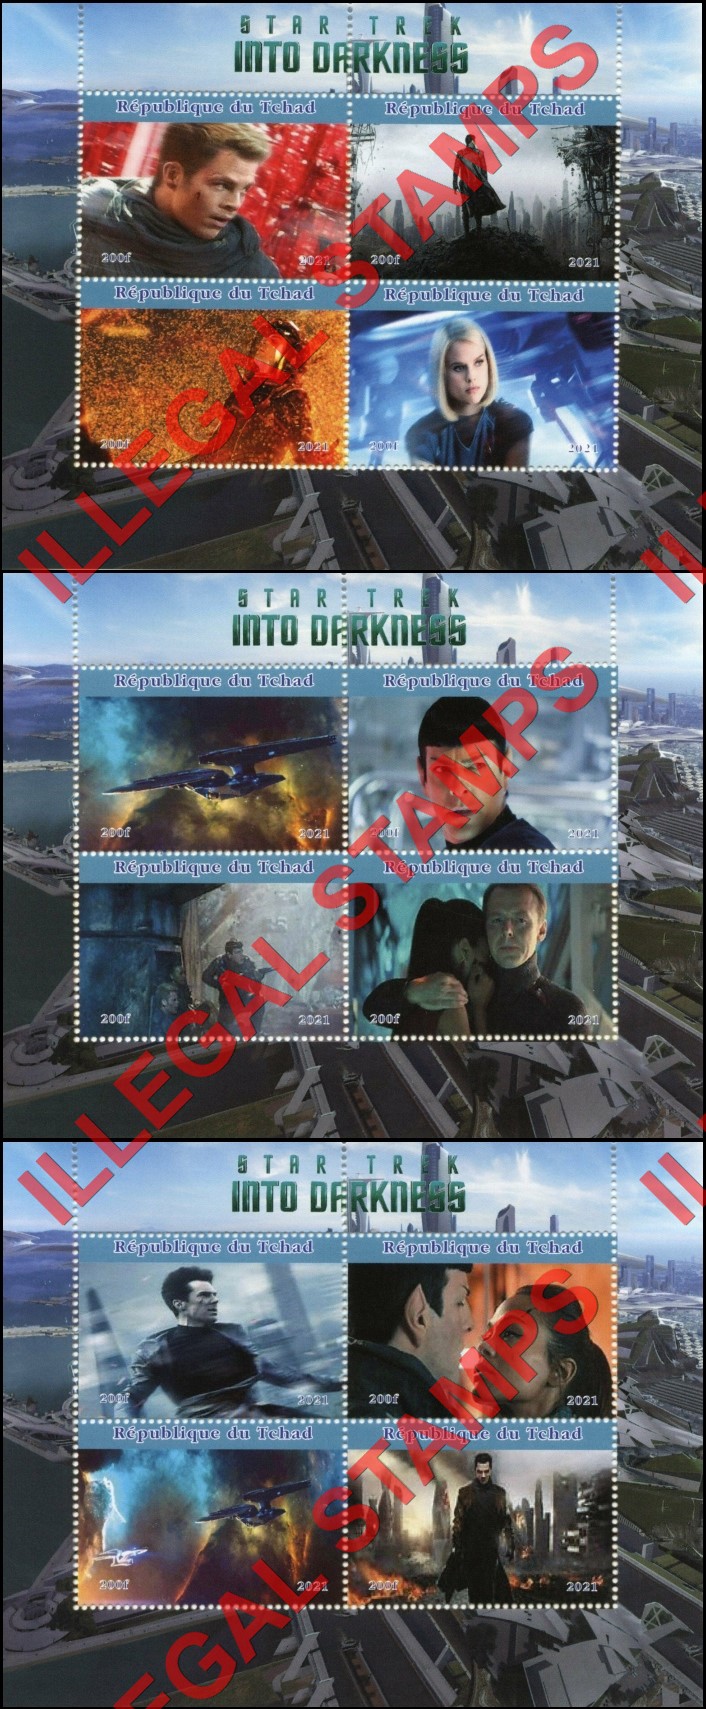 Chad 2021 Star Trek Into Darkness Illegal Stamps in Souvenir Sheets of 4